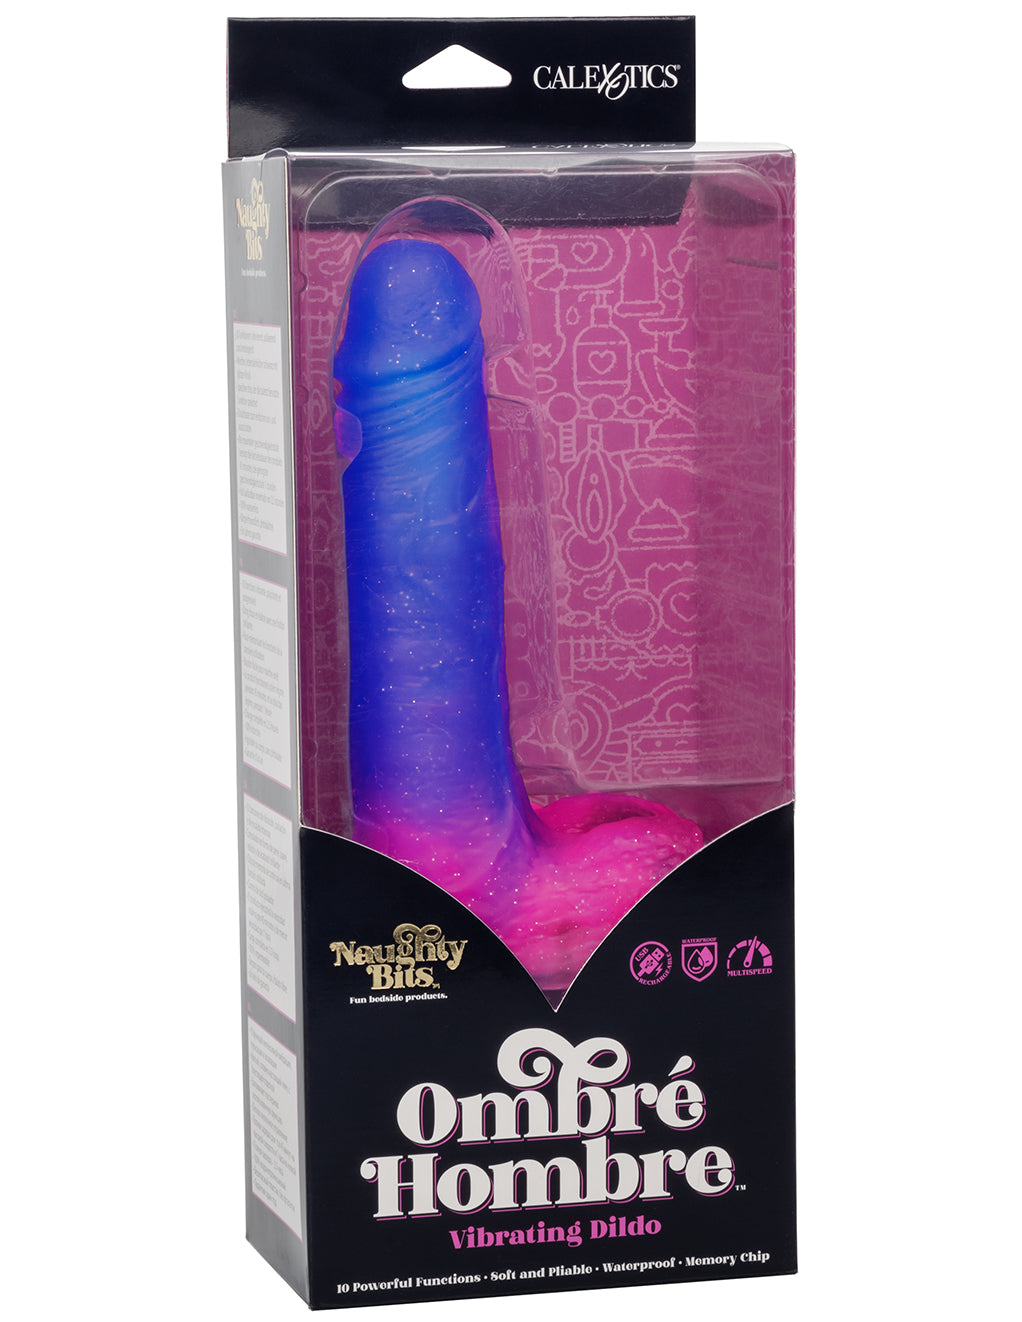 Naughty Bits Ombre Hombre Vibrating Dildo- front package